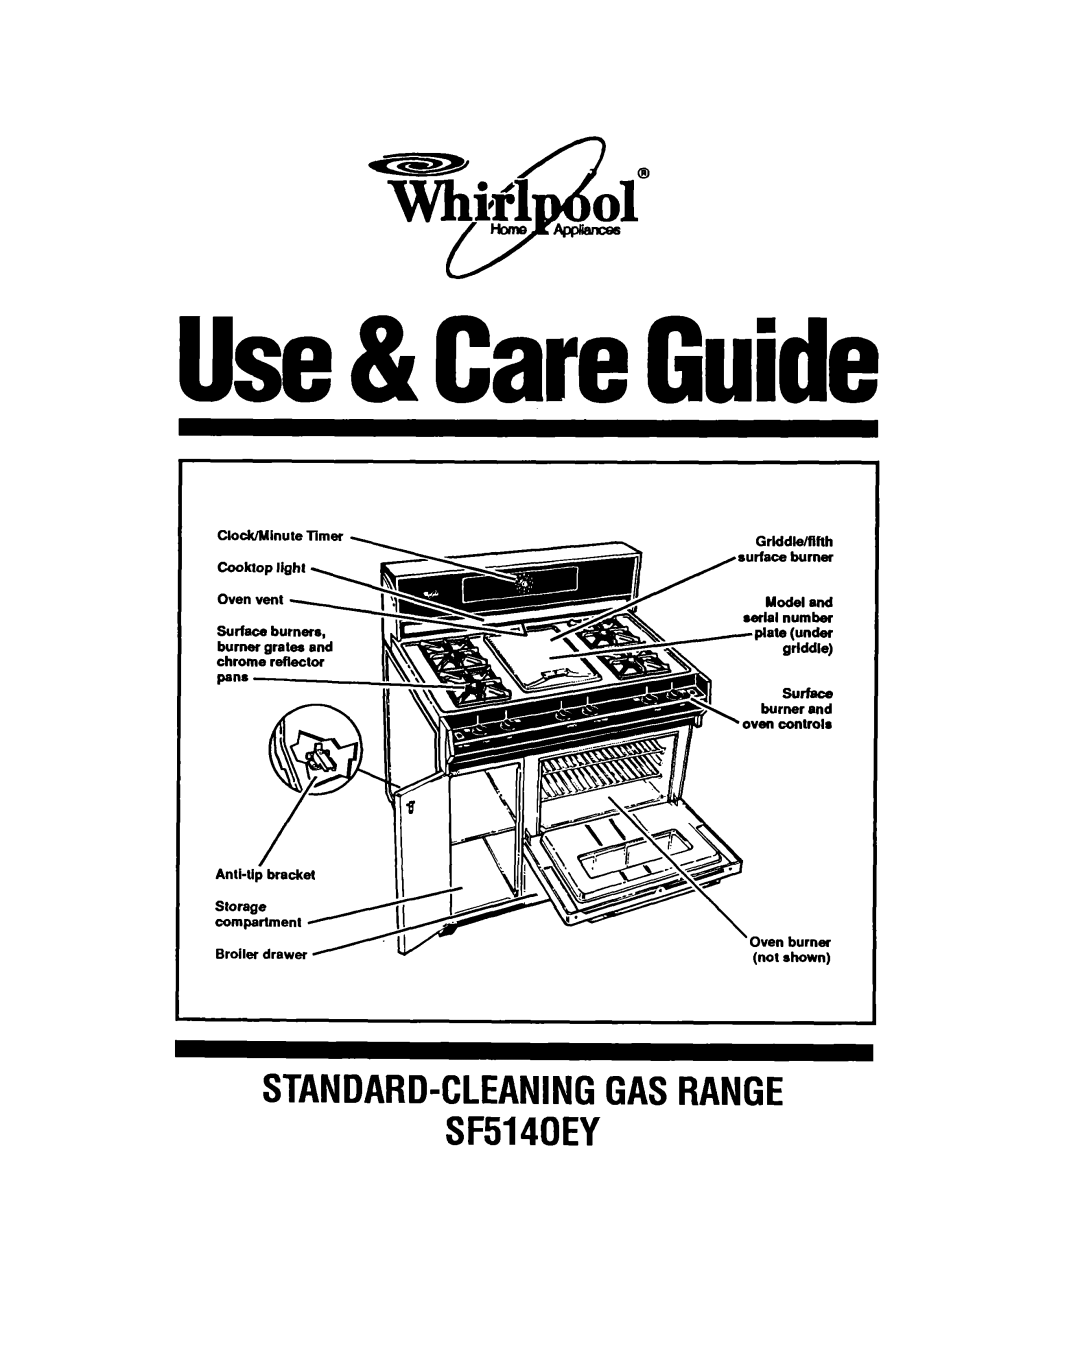 Whirlpool manual hJrfaoe, STANDARD-CLEANINGGASRANGE SF5140EY, CtodUMinute Timer se&l number, not shown 